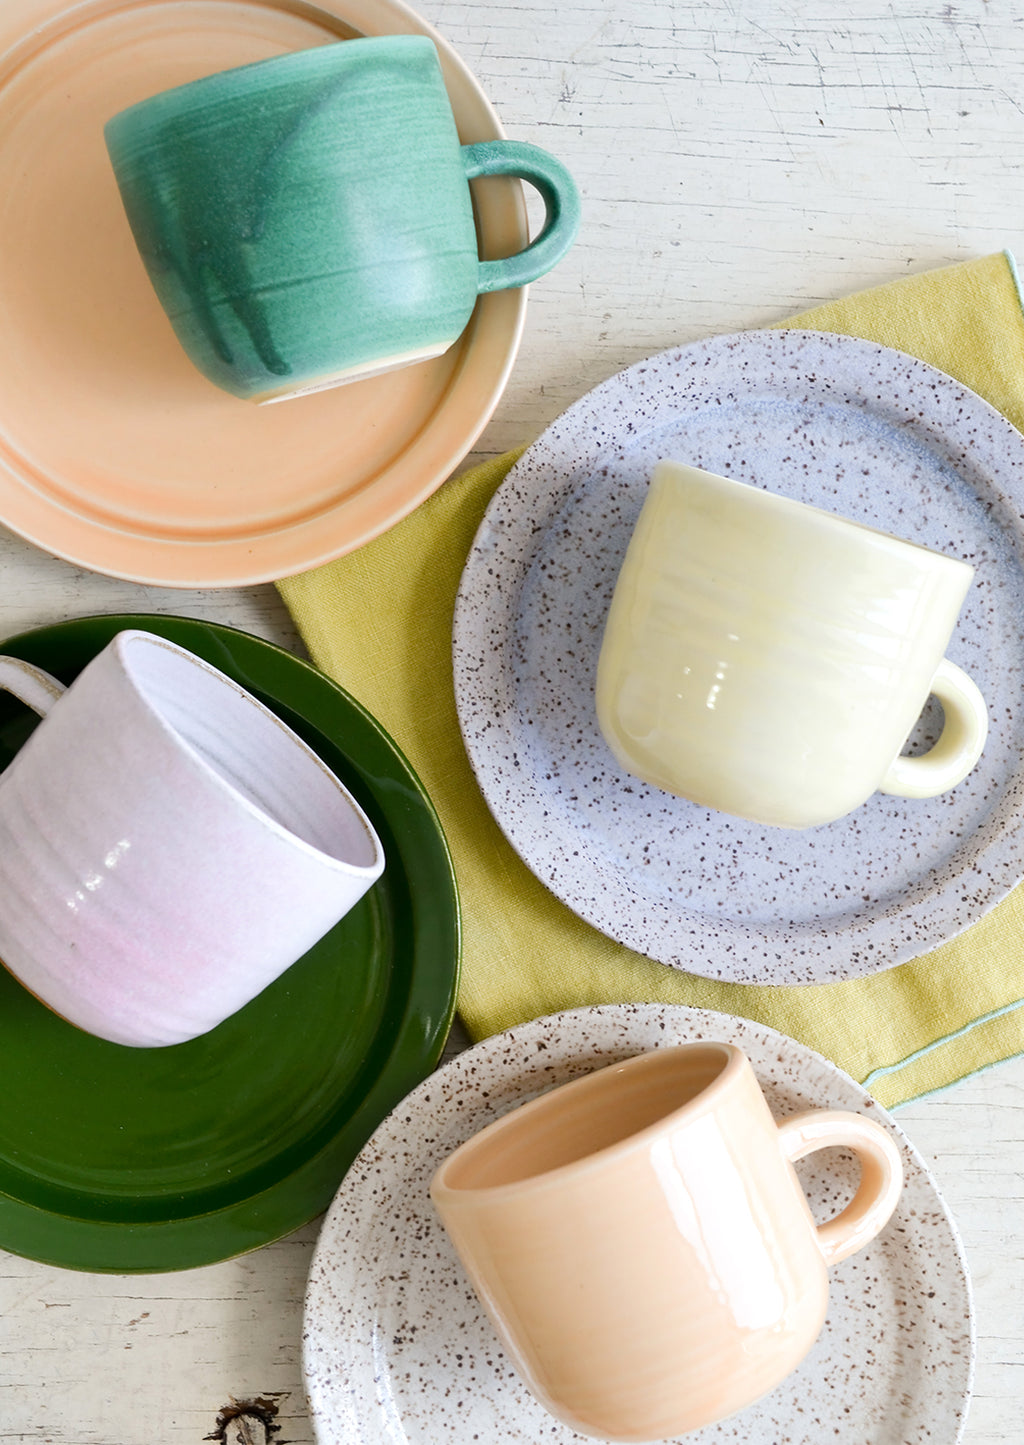 5: A mix of hand glazed plates and mugs.